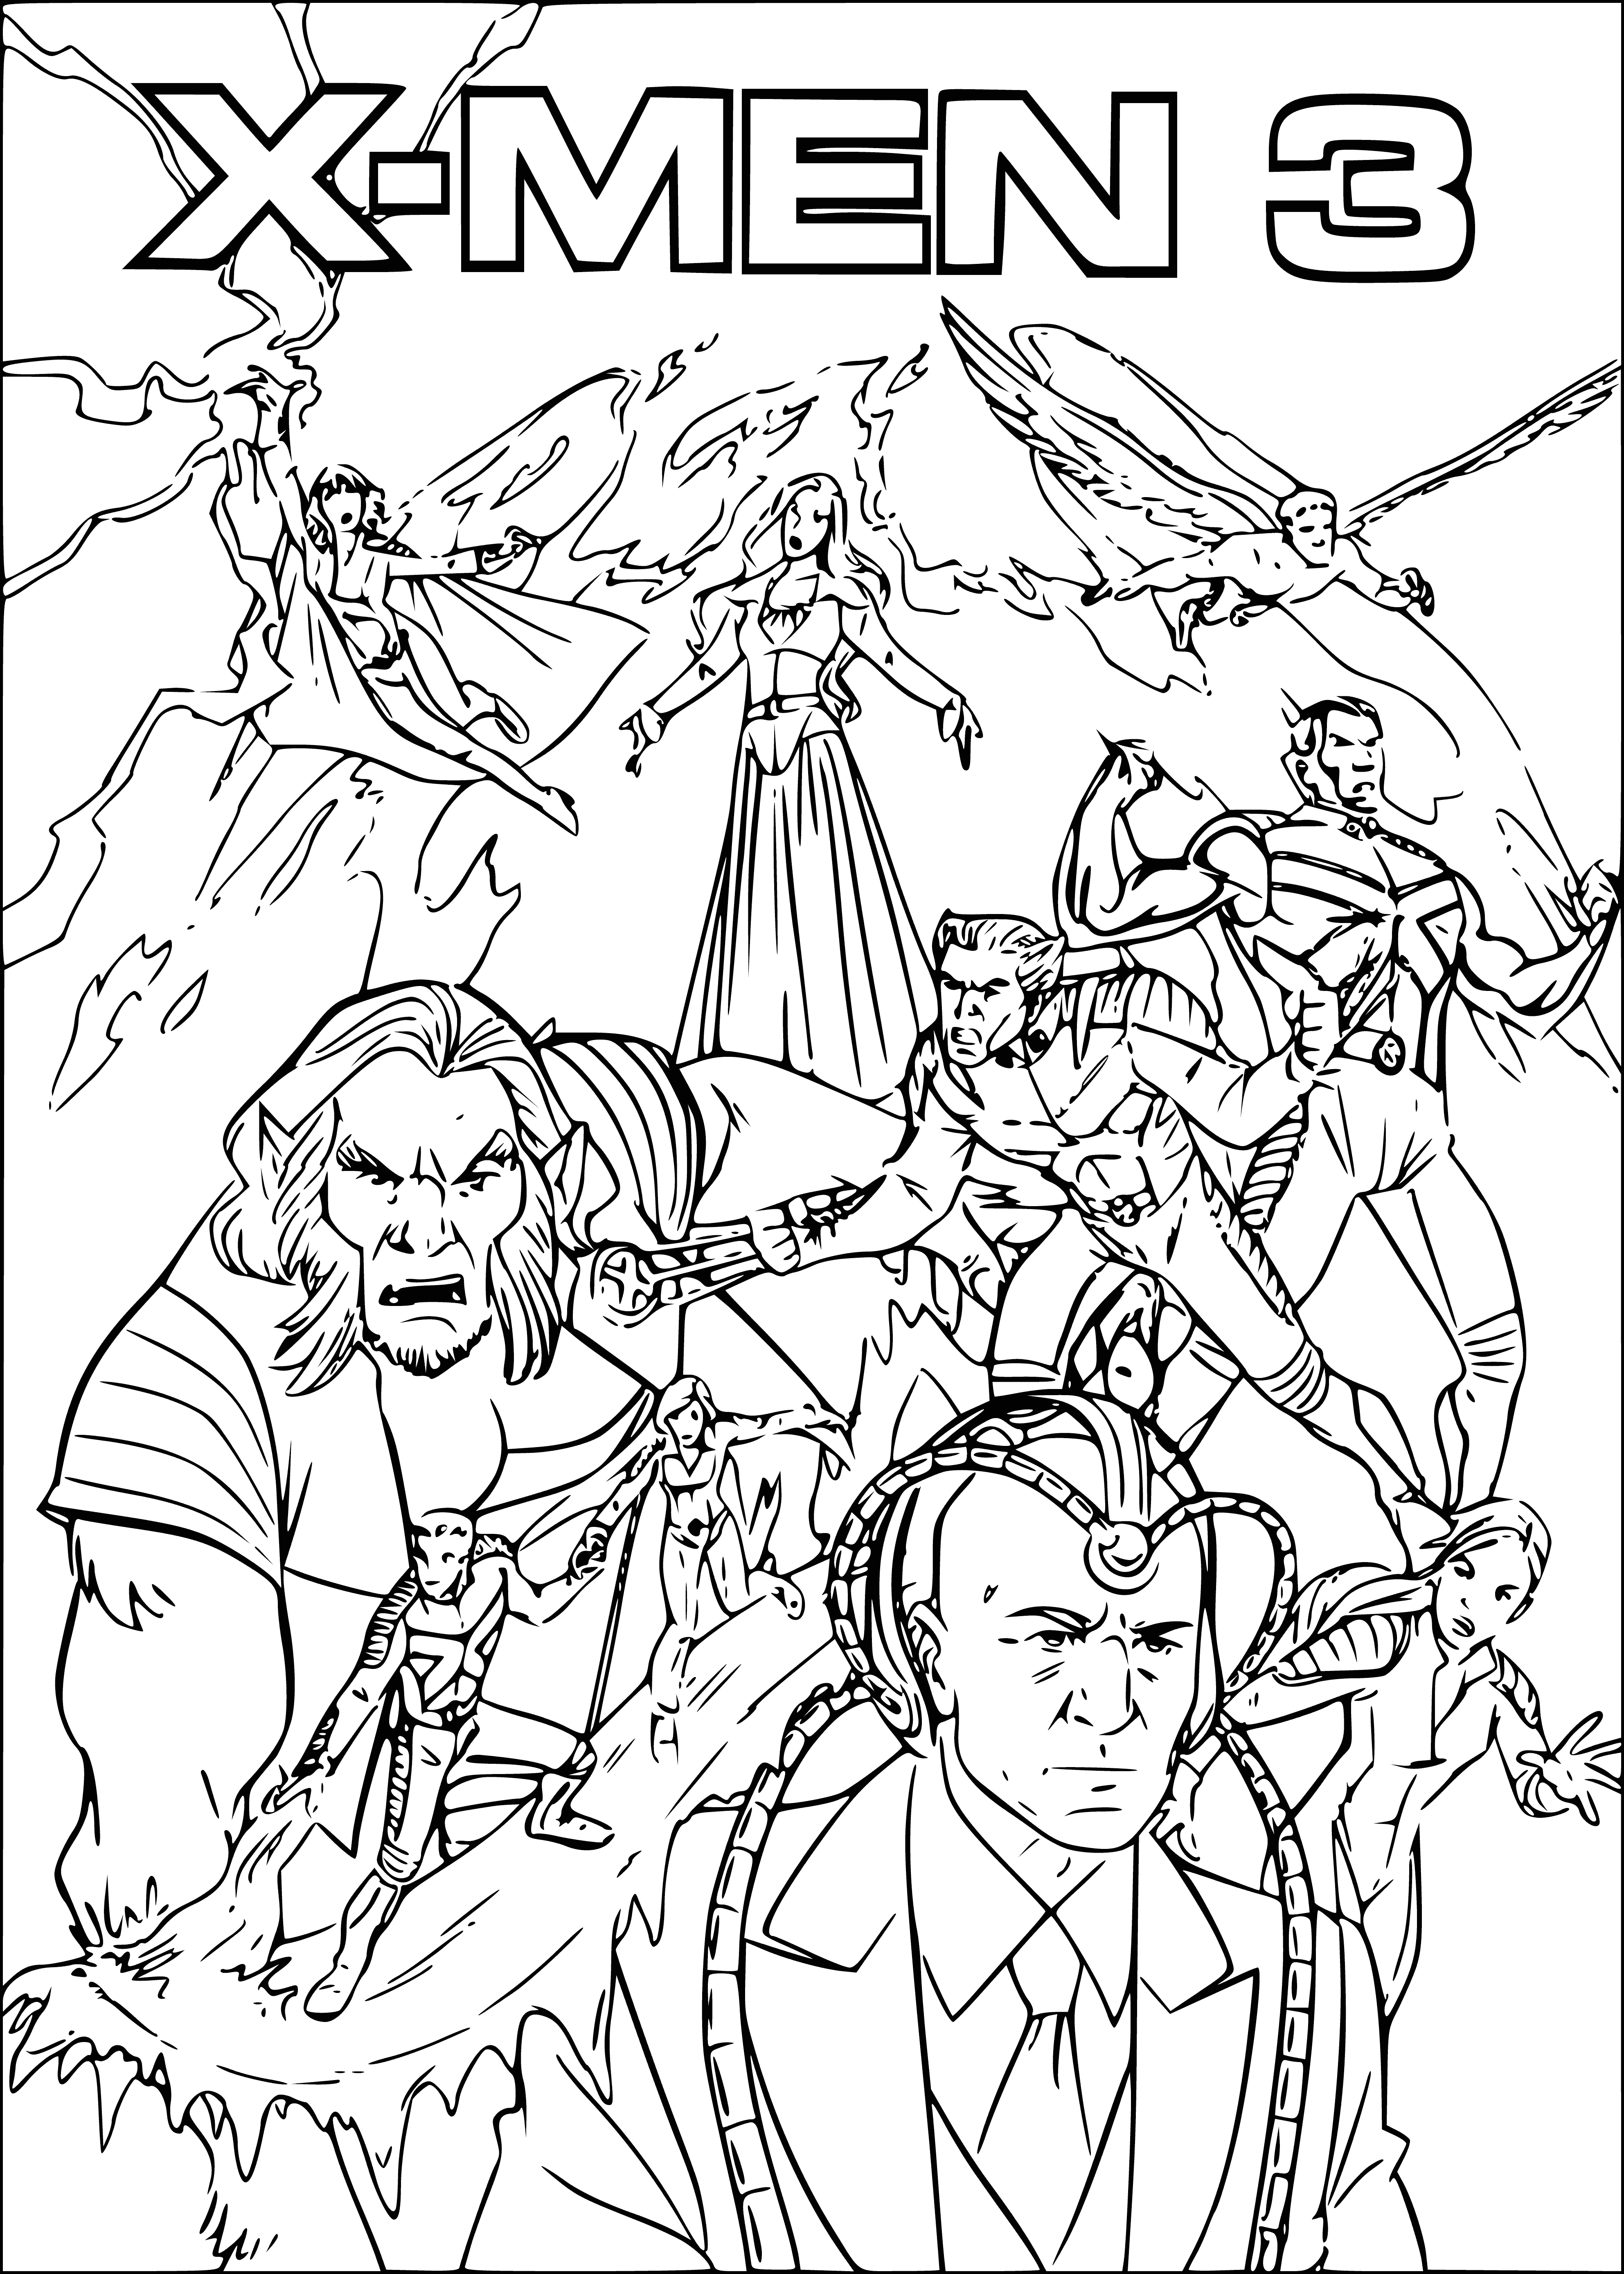 coloring page: X-men use their powers to fight for justice and peace. They are powerful and face other super-powered opponents.